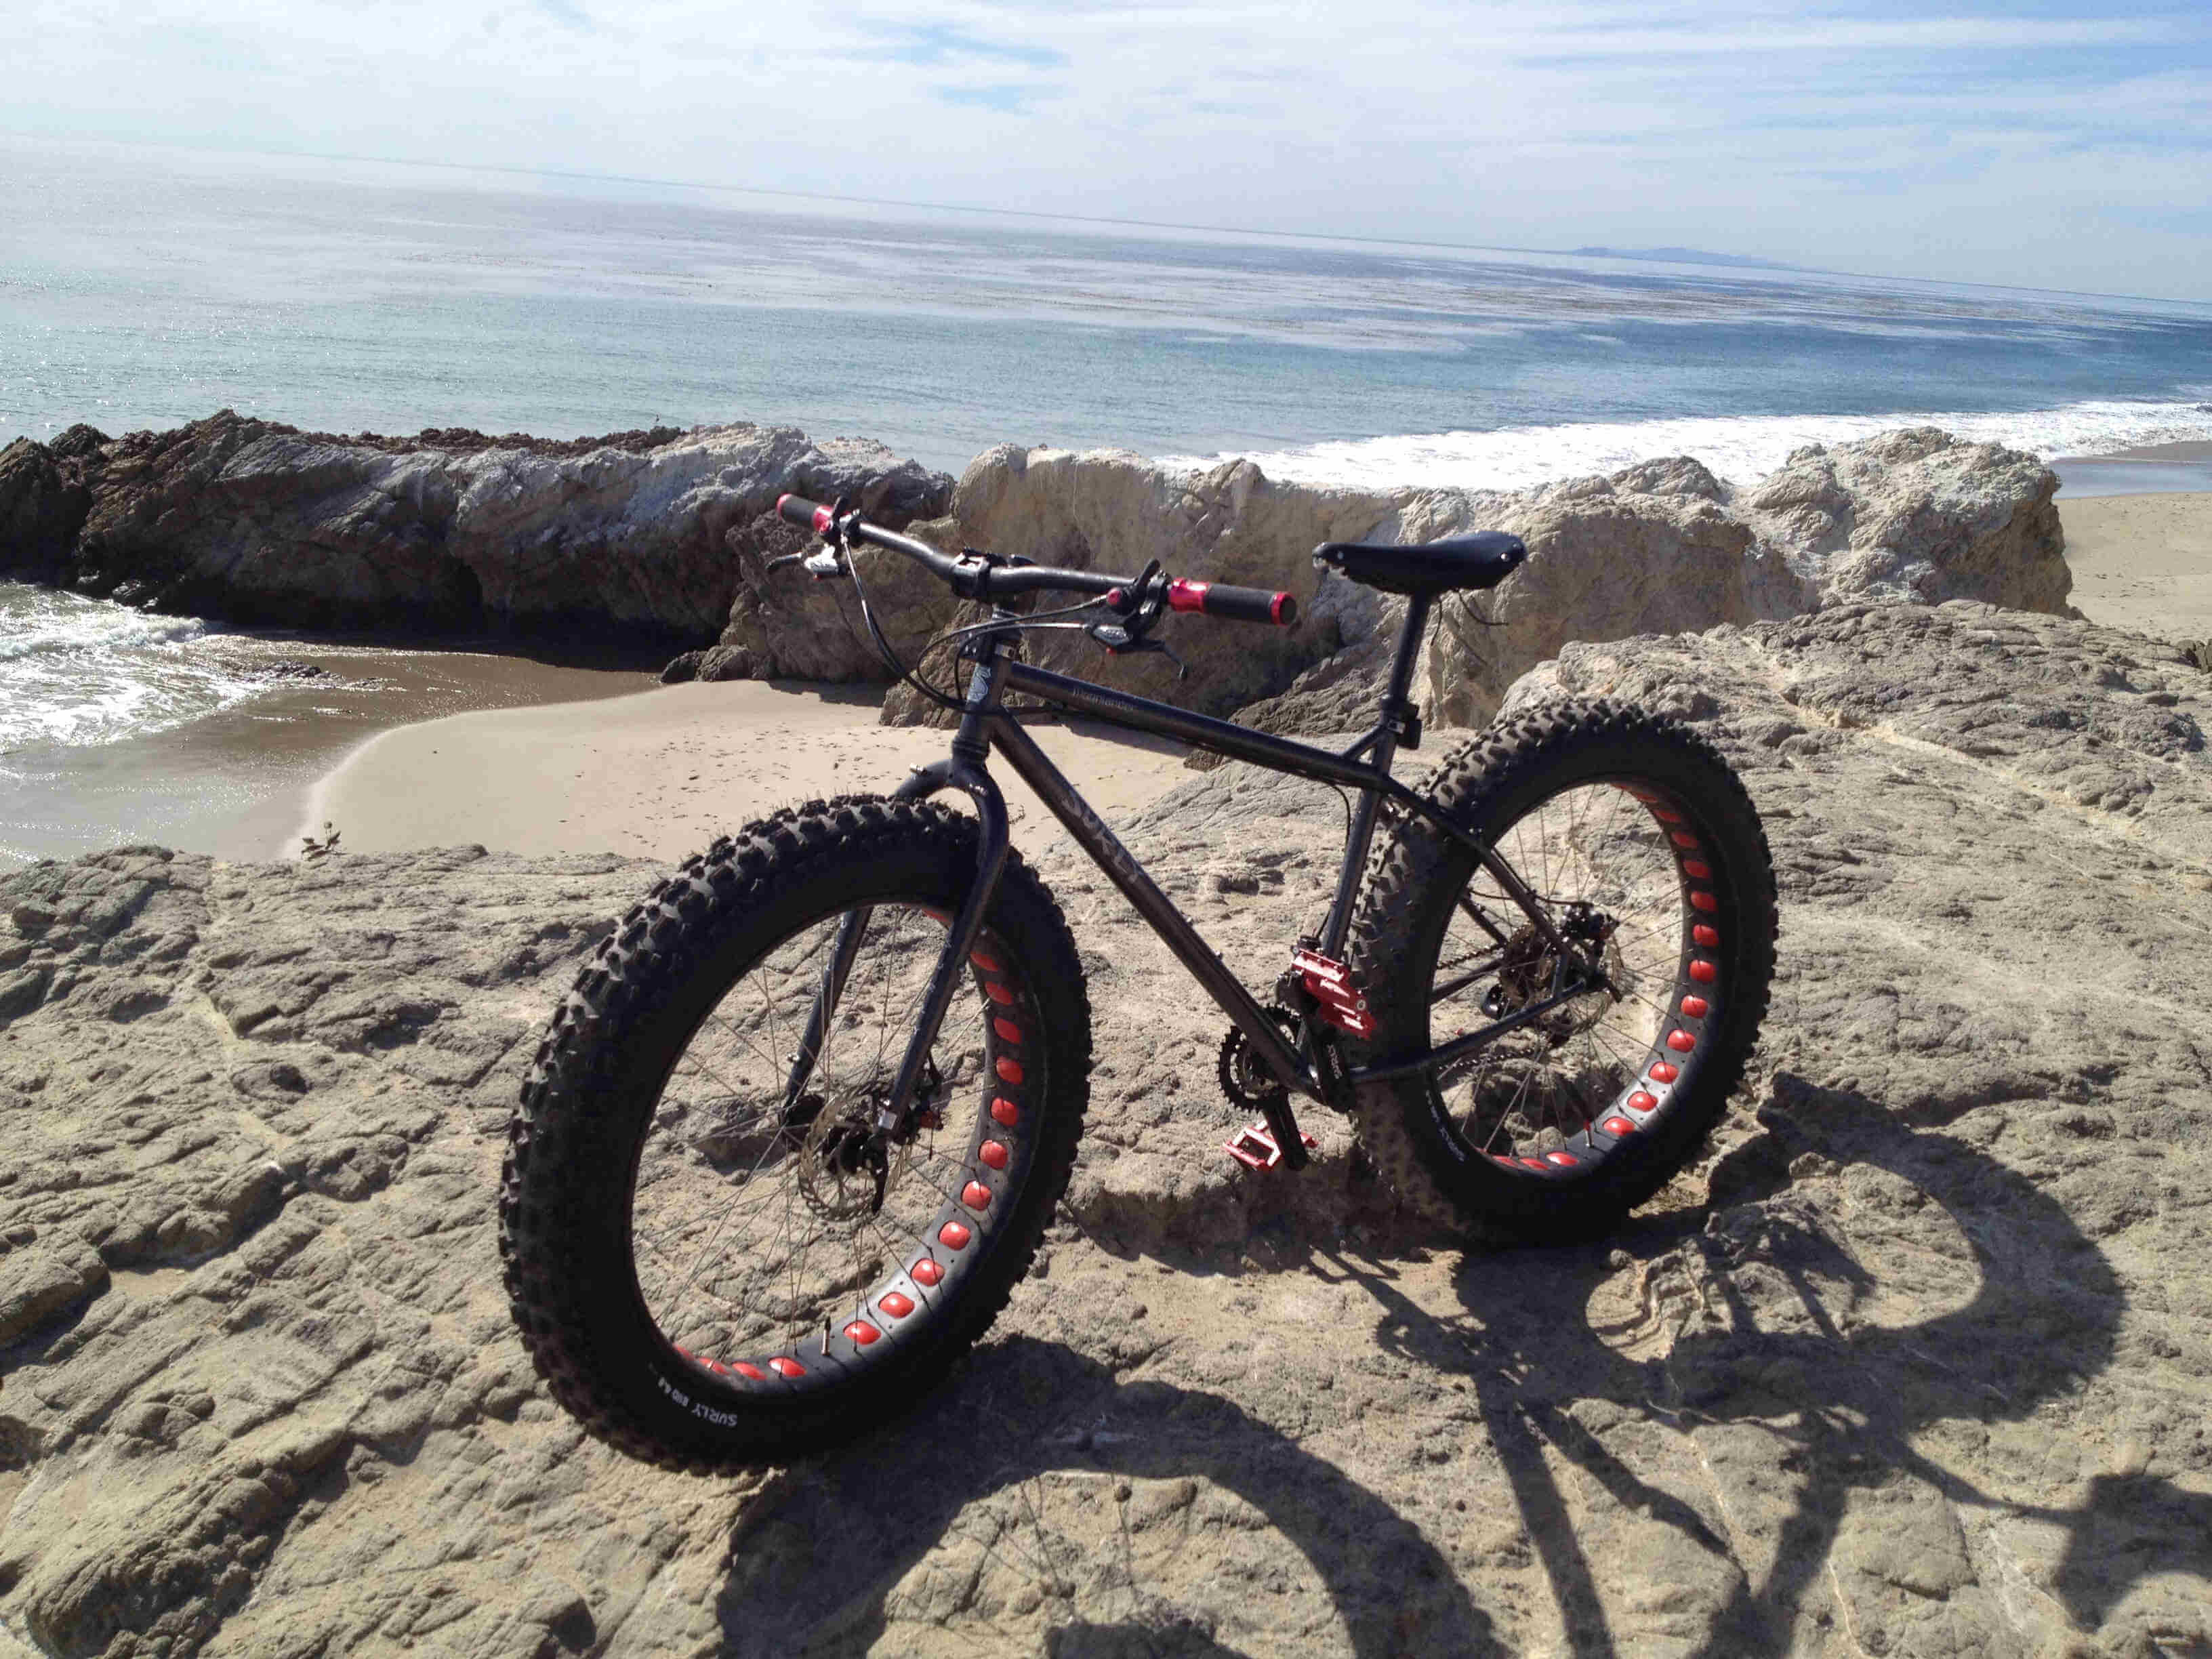 Left side view of a black Surly Moonlander fat bike, parked on a rock ledge, with the ocean behind